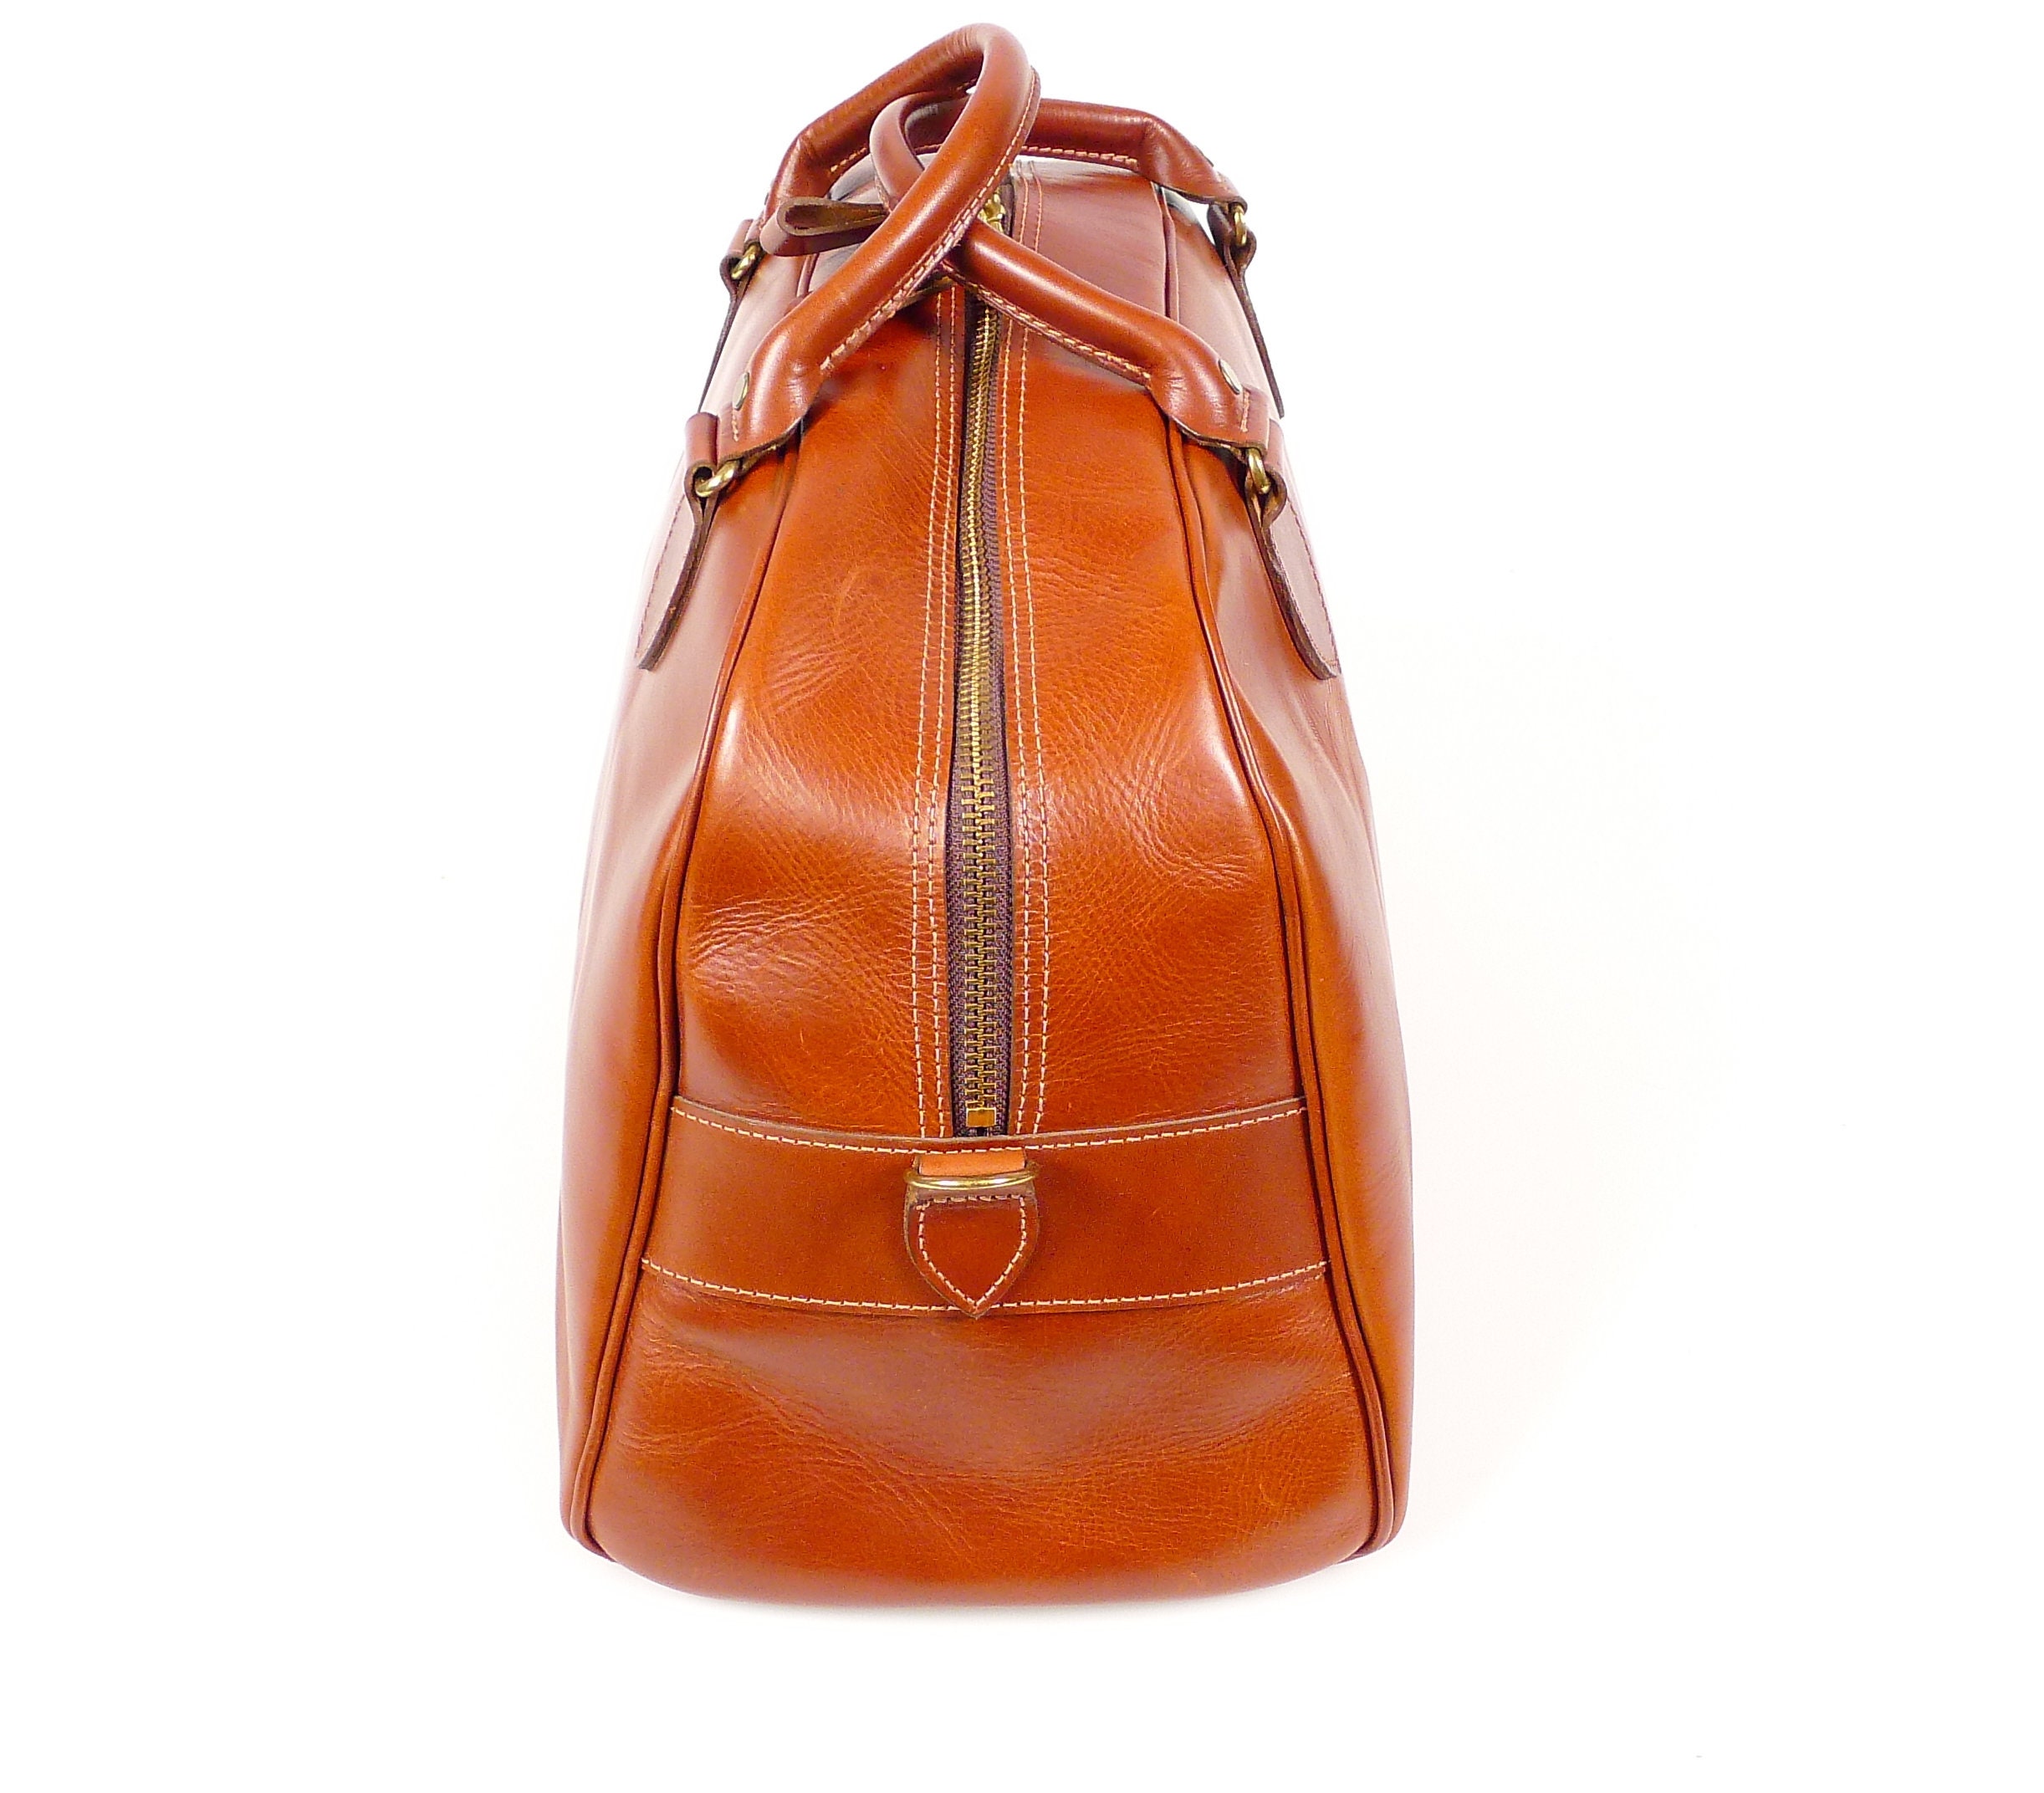 Chapman Reiver Leather Despatch Bag in Brown